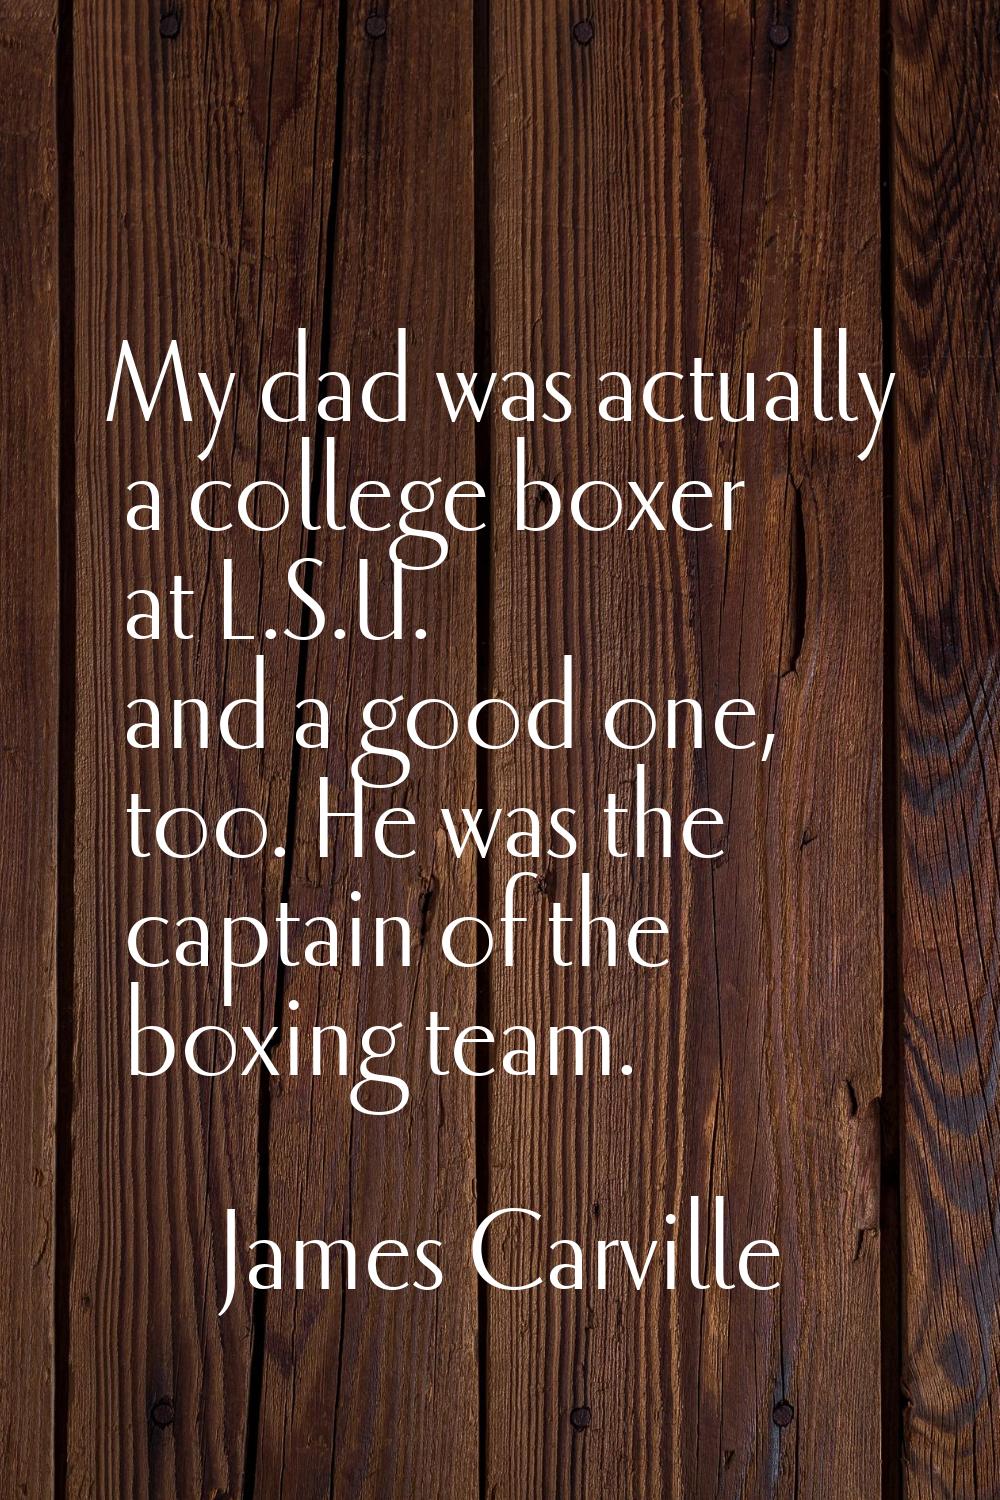 My dad was actually a college boxer at L.S.U. and a good one, too. He was the captain of the boxing